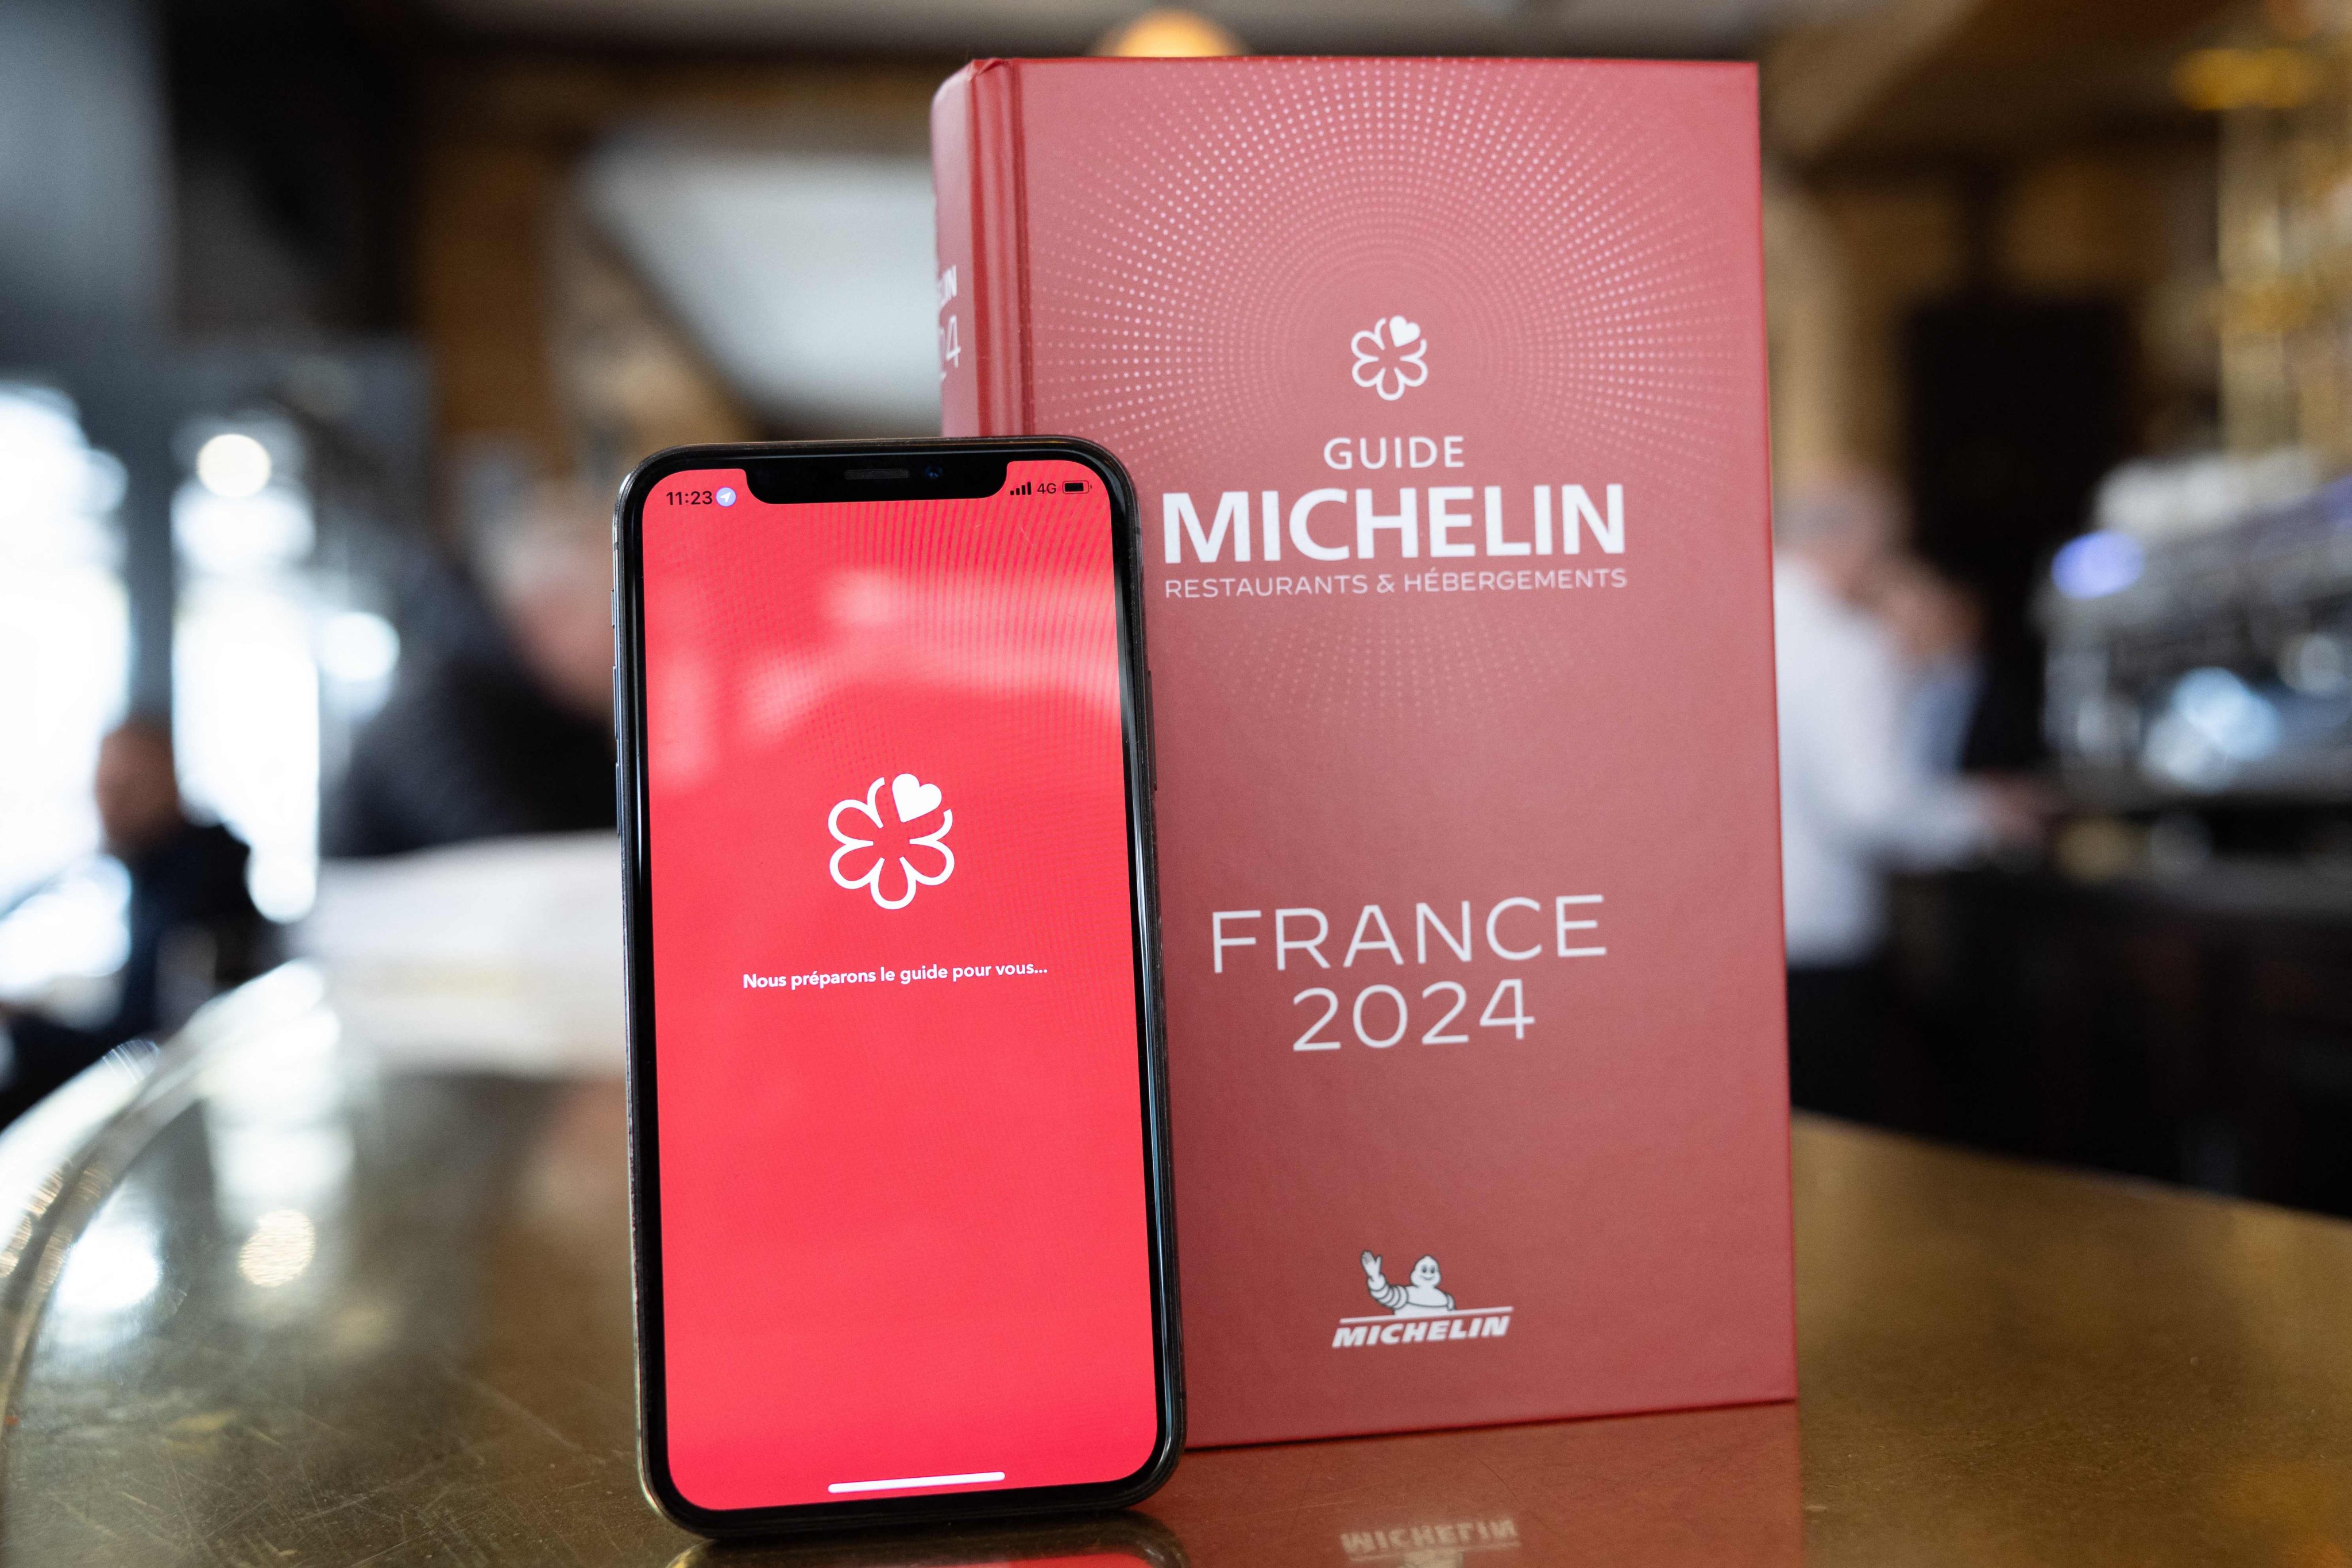 The Michelin Guide awards up to three stars for excellence to a select few restaurants. Photo: AFP